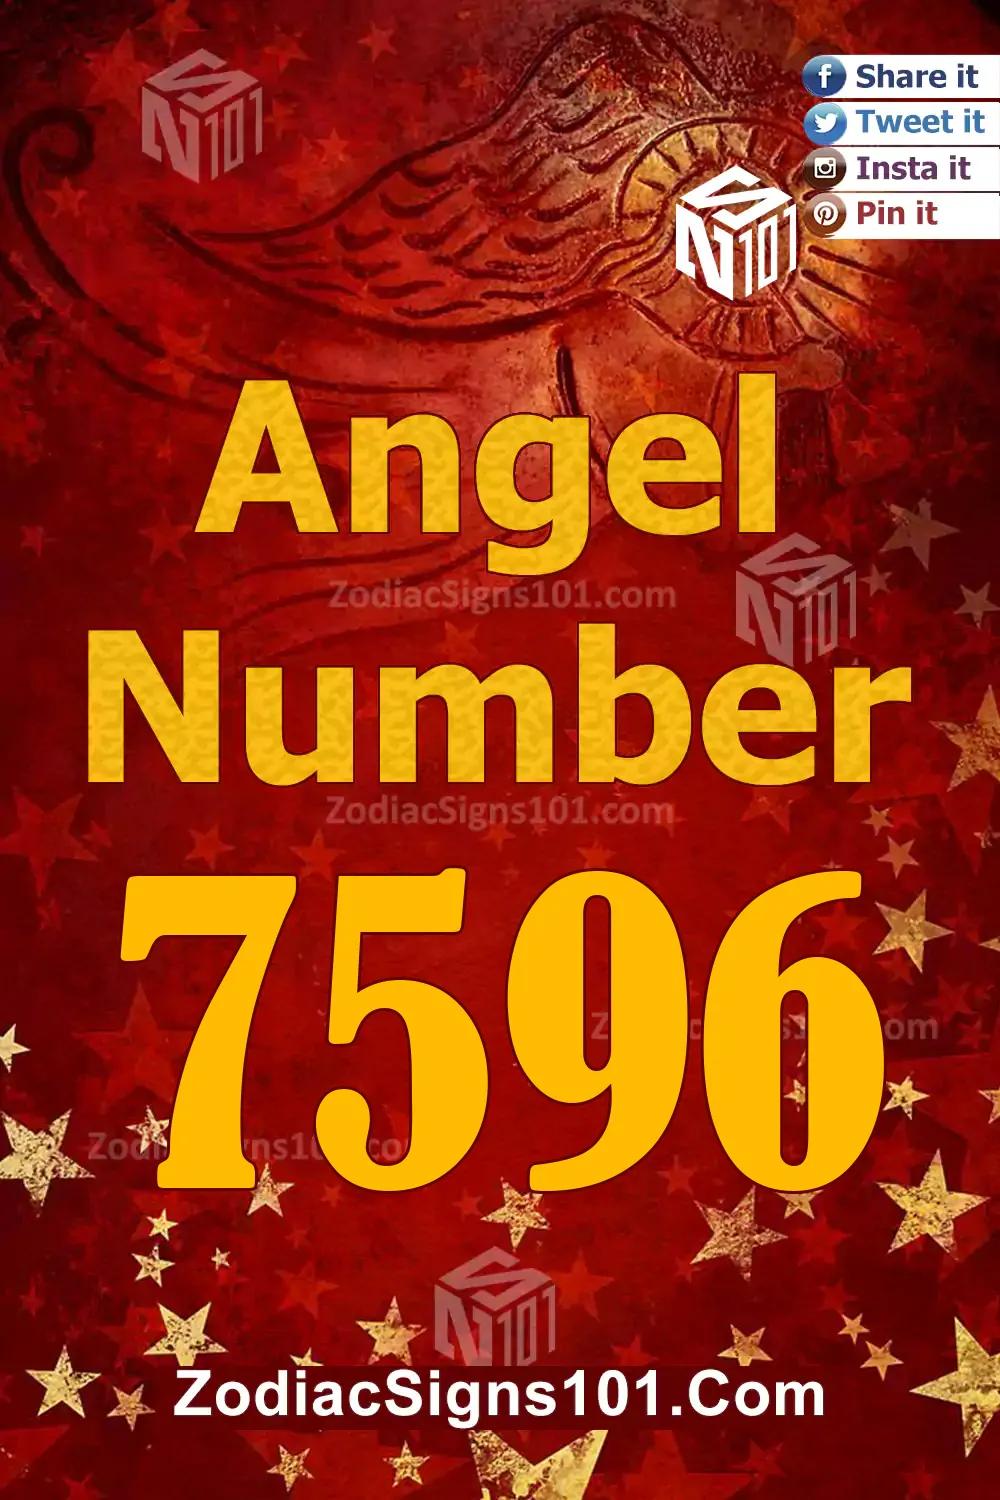 7596 Angel Number Meaning